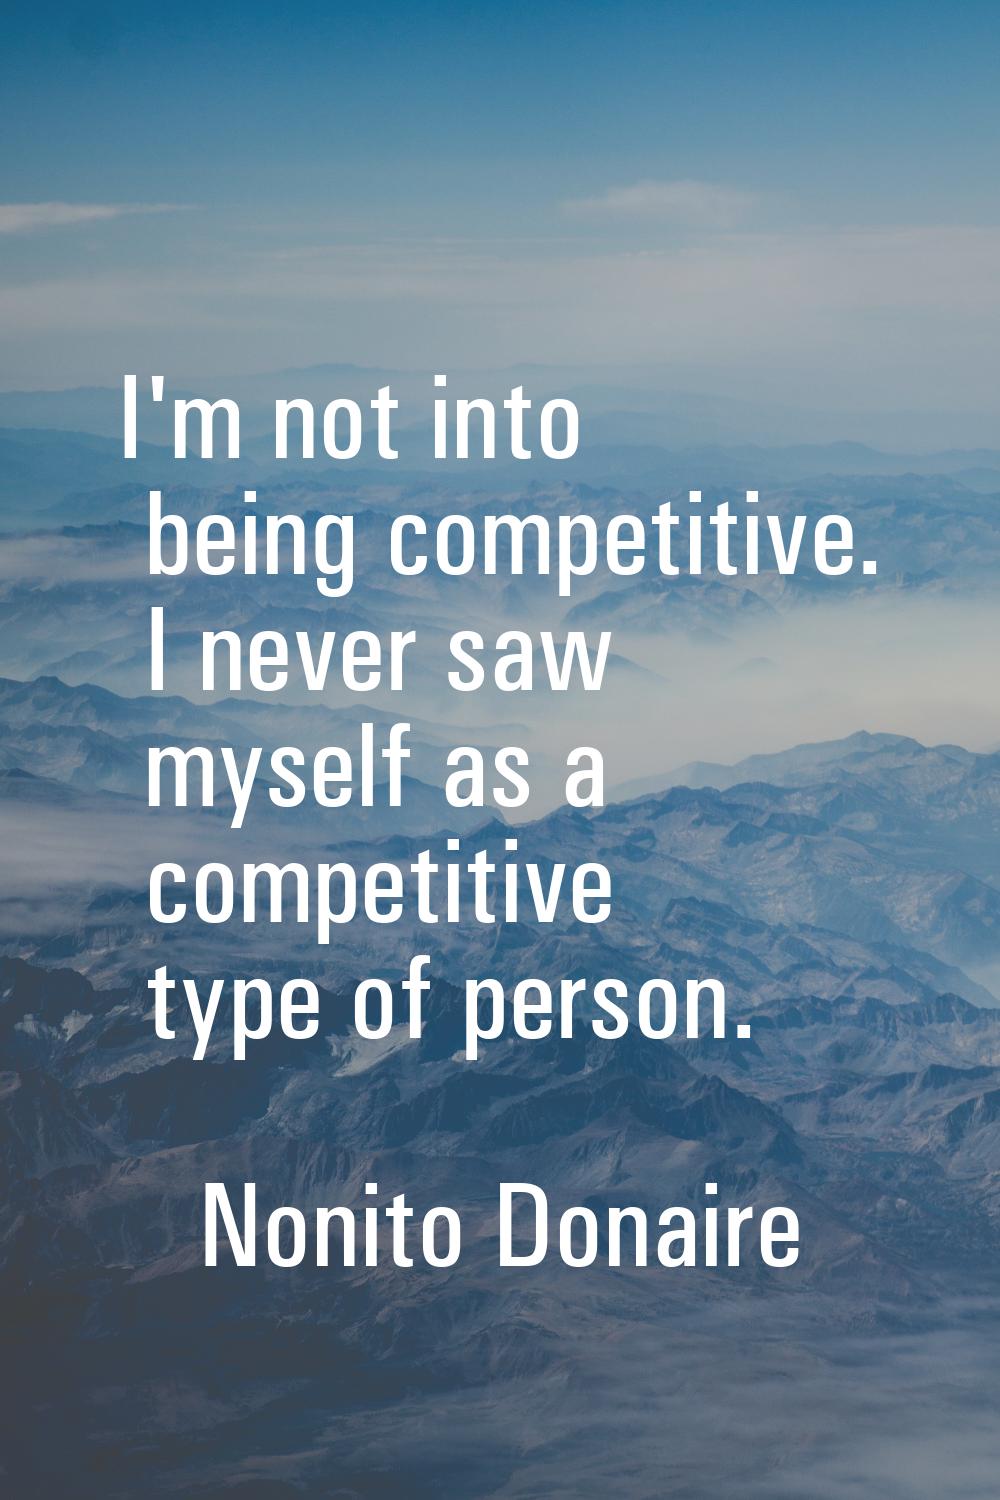 I'm not into being competitive. I never saw myself as a competitive type of person.